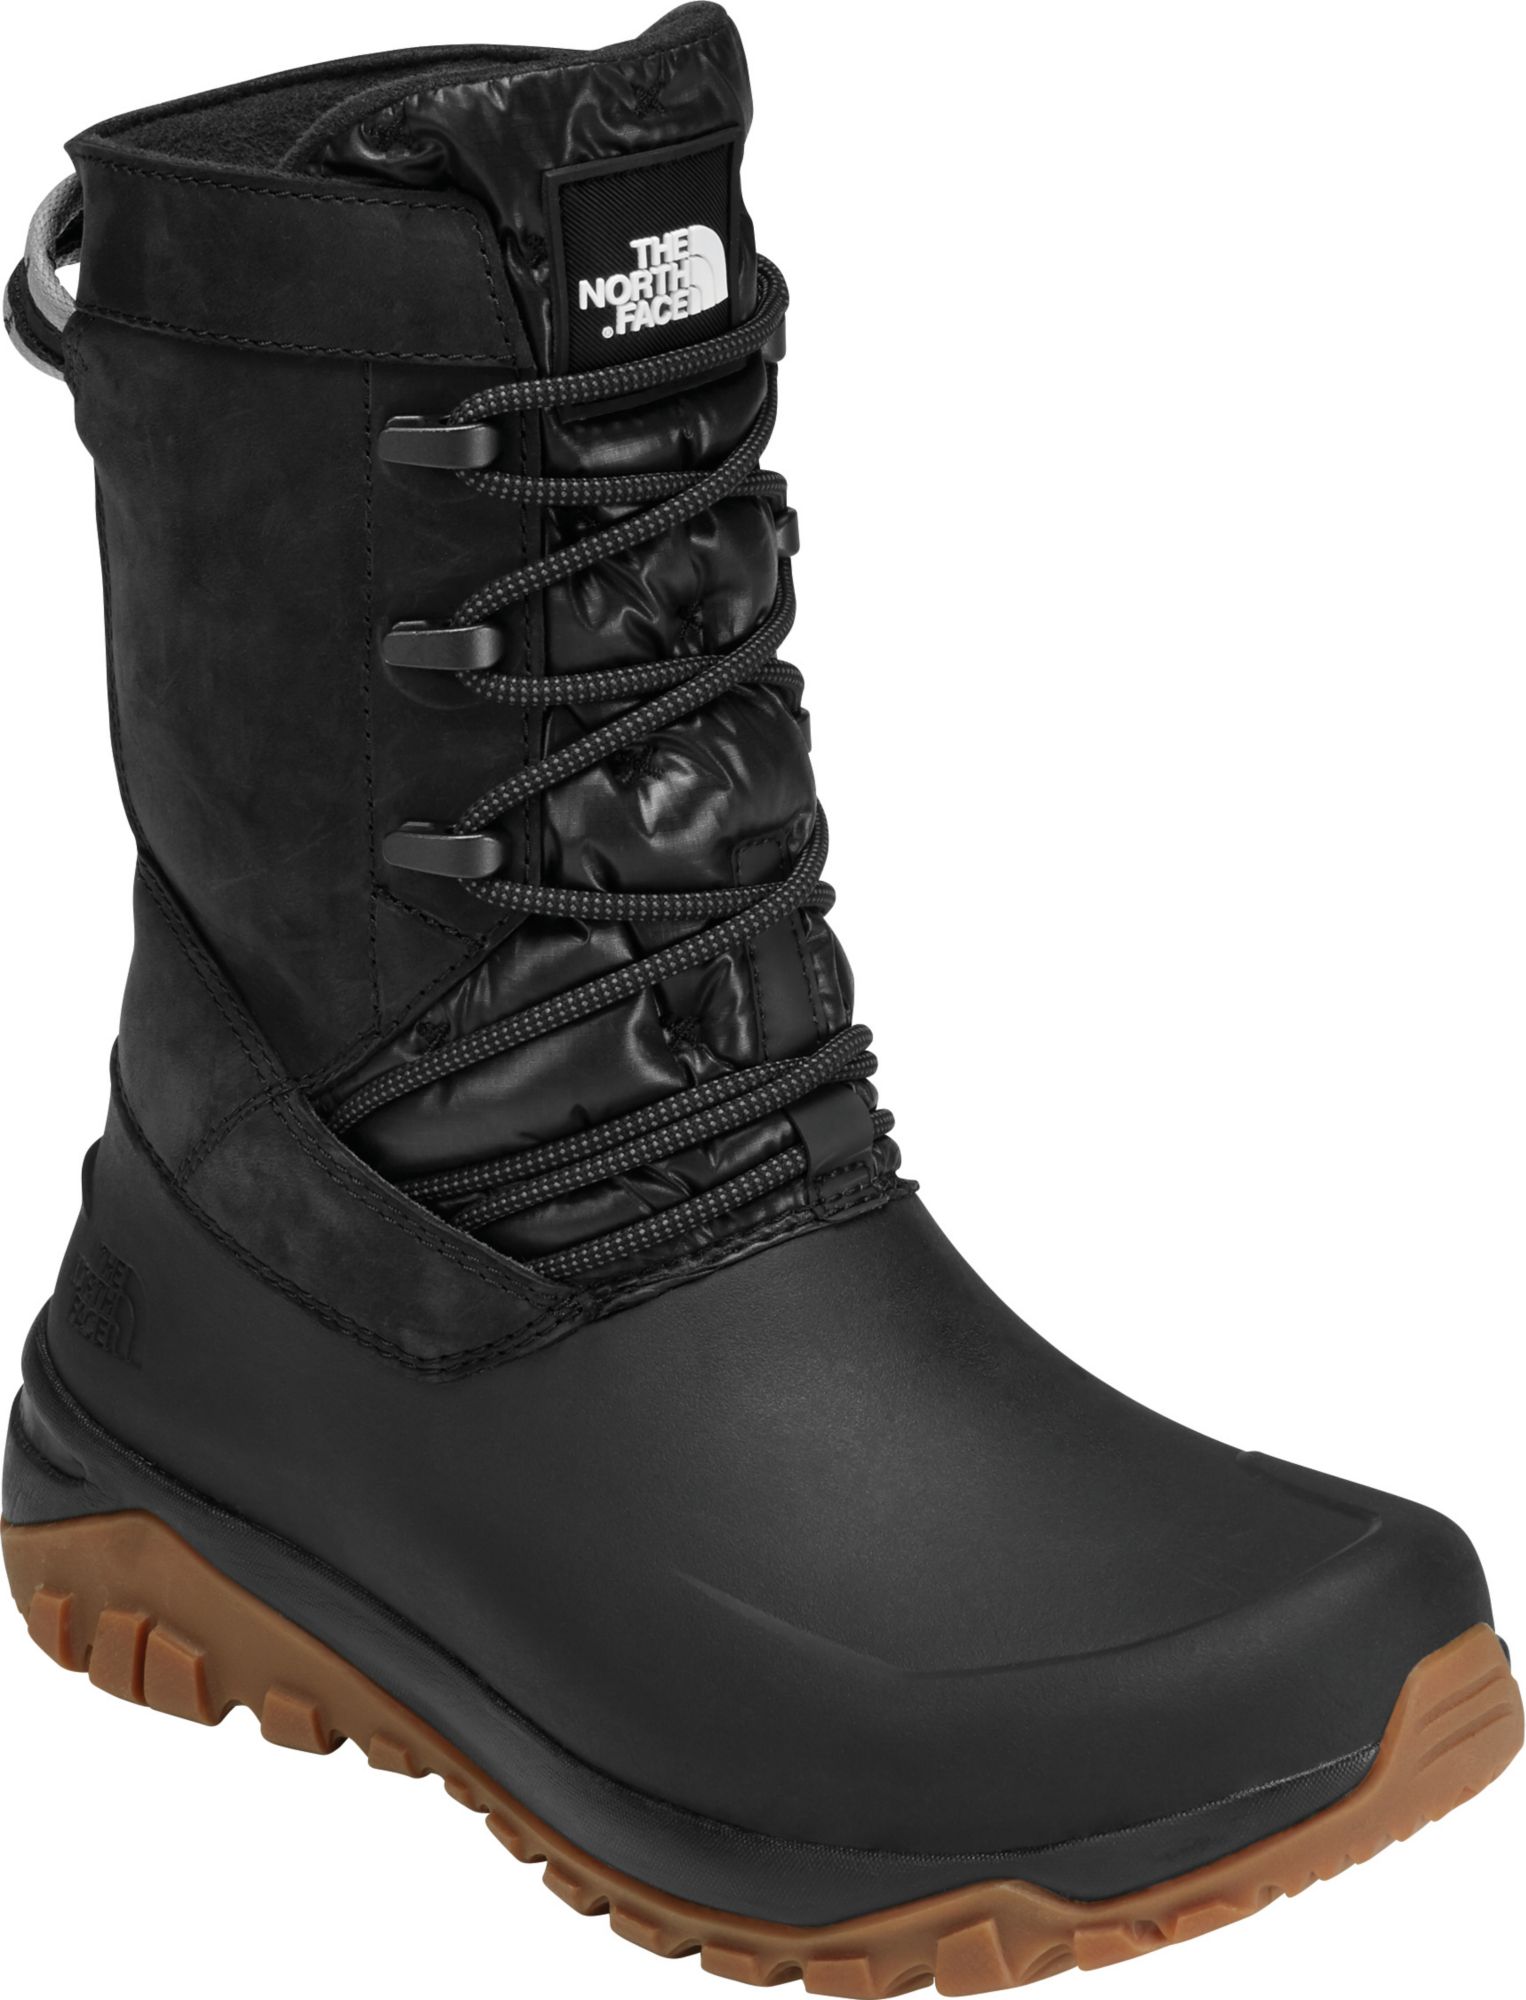 boots north face women's